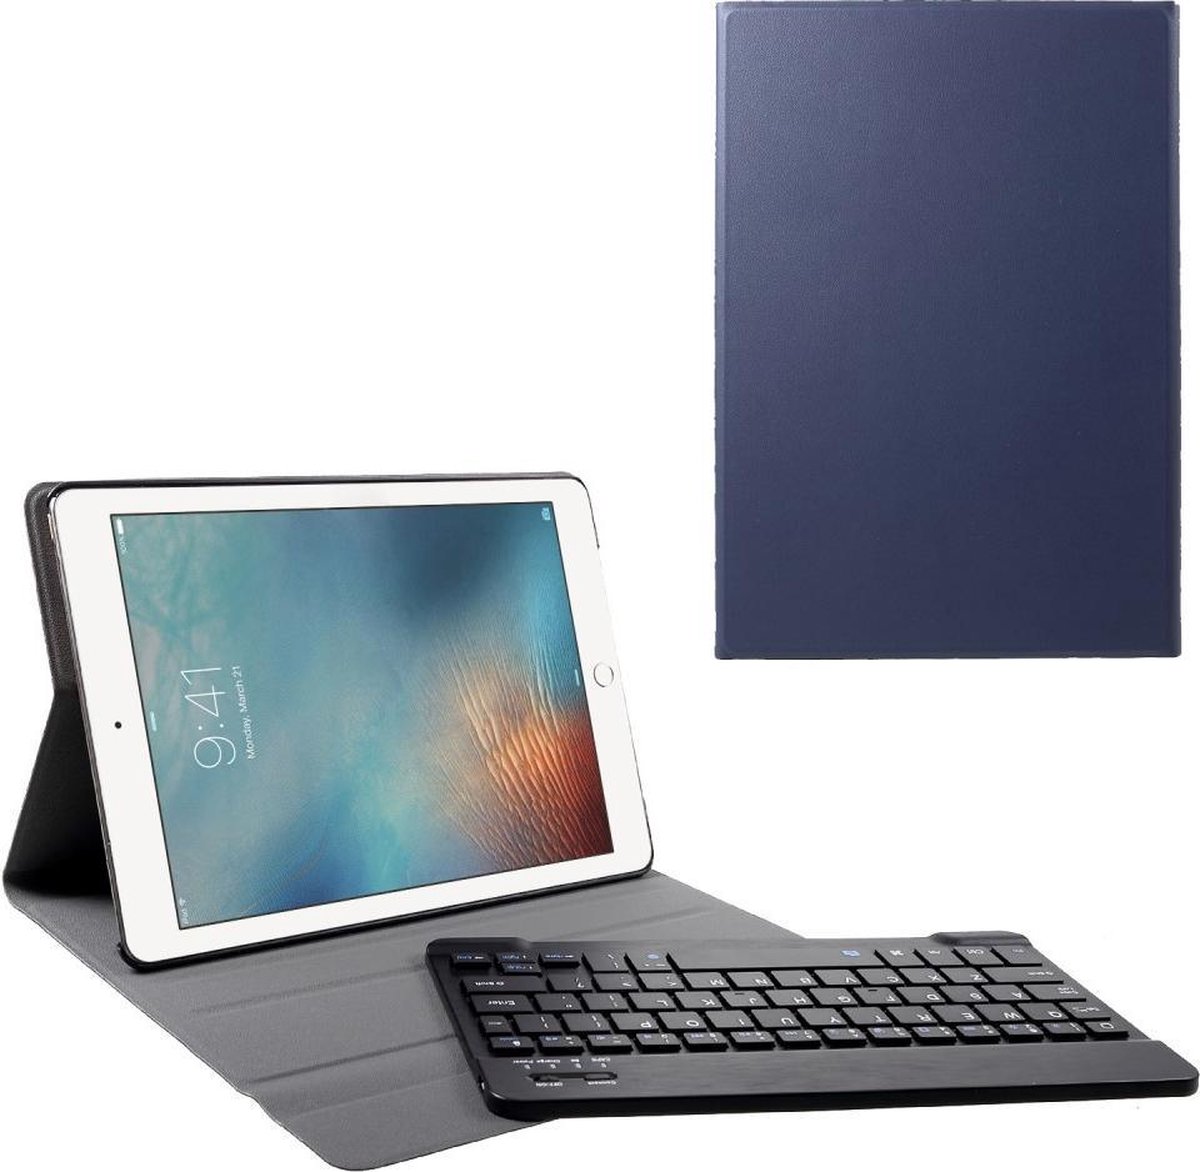 Lunso - afneembare Keyboard hoes - Geschikt voor iPad 9.7 (2017/2018) / Pro 9.7 / Air / Air 2 - Blauw - Lunso